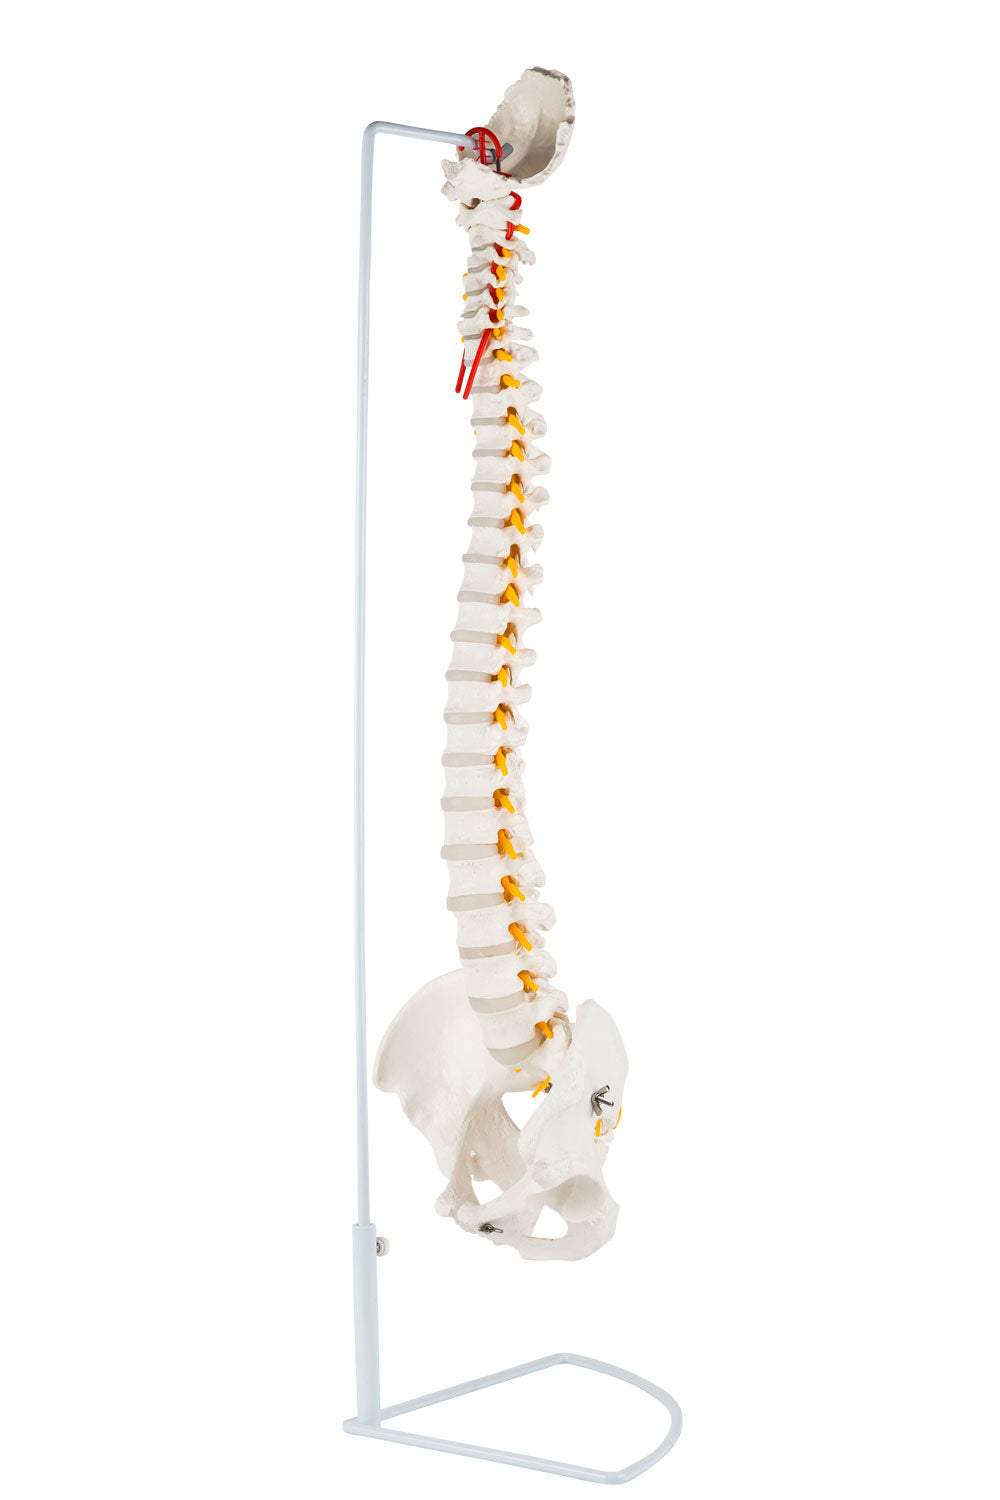 Flexible model of the spine with nerves and other bones presented on a stand